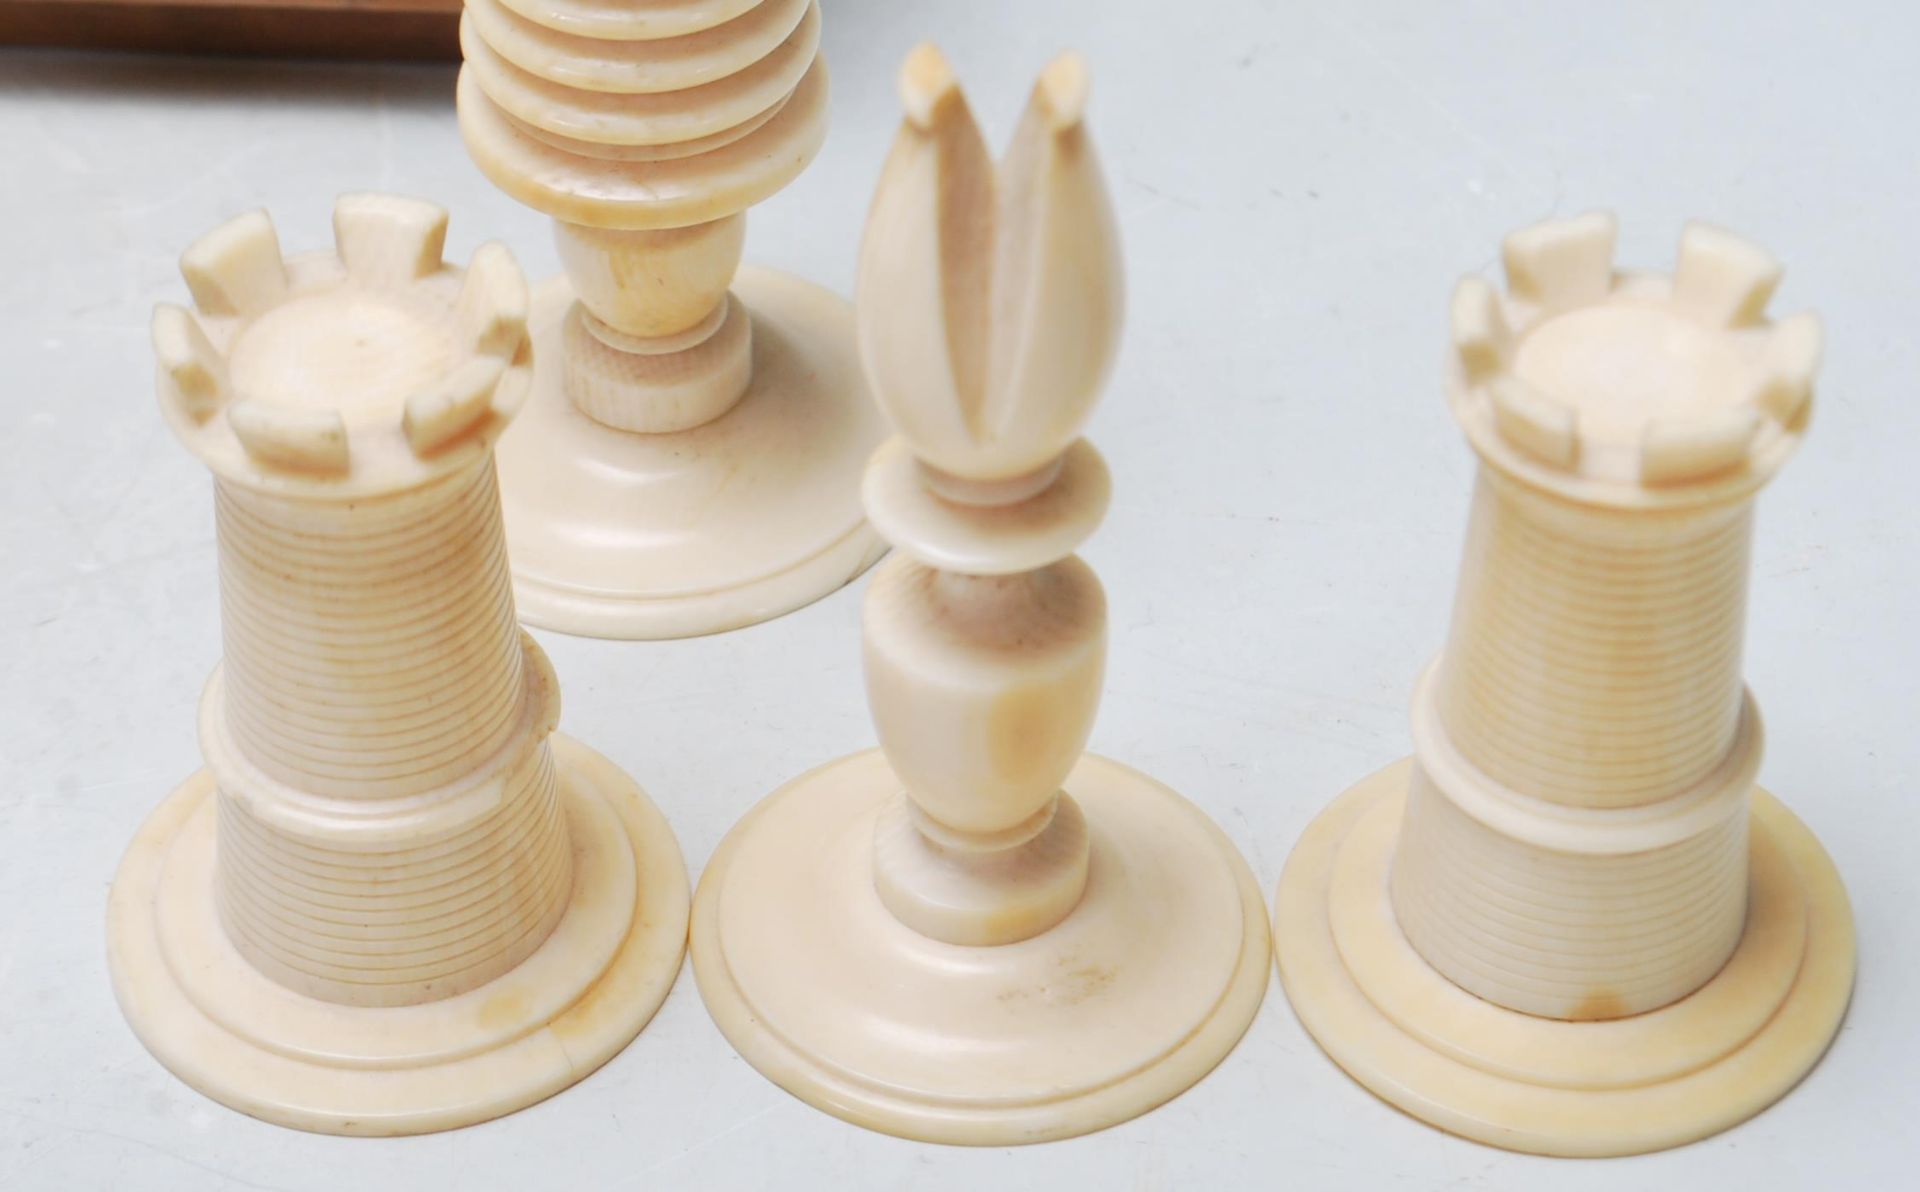 GROUP OF 19TH CENTURY VICTORIAN SATIN IVORY CHESS PIECES - Image 6 of 9